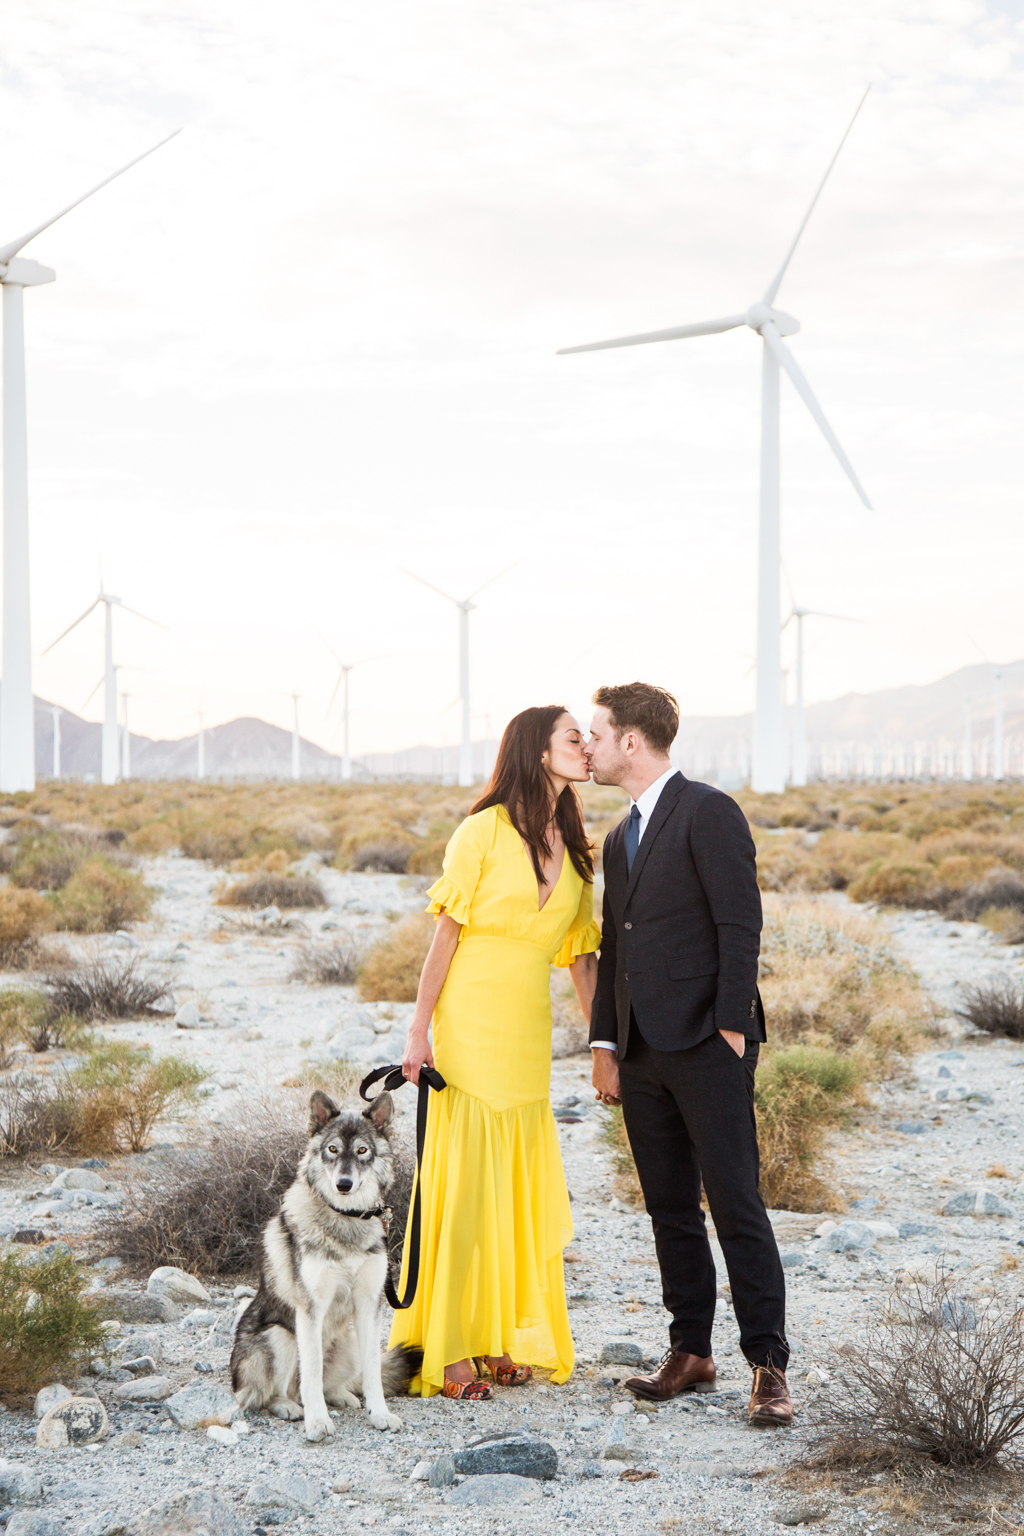 Engagement shoot at Palm Springs windmills